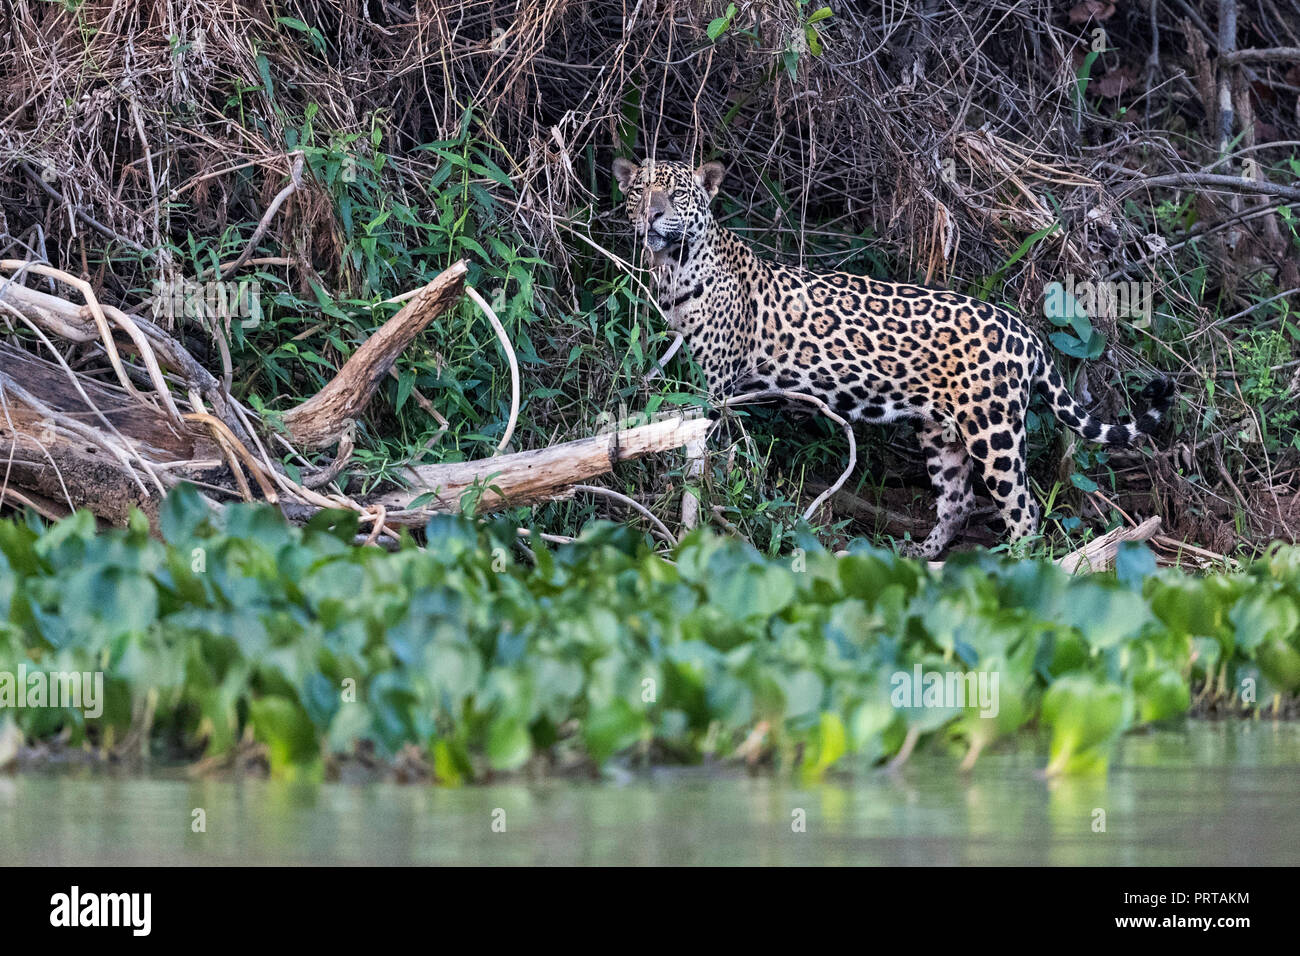 An adult jaguar, Panthera onca, in the jungle along the Rio Cuiabá, Mato Grosso, Brazil. Stock Photo